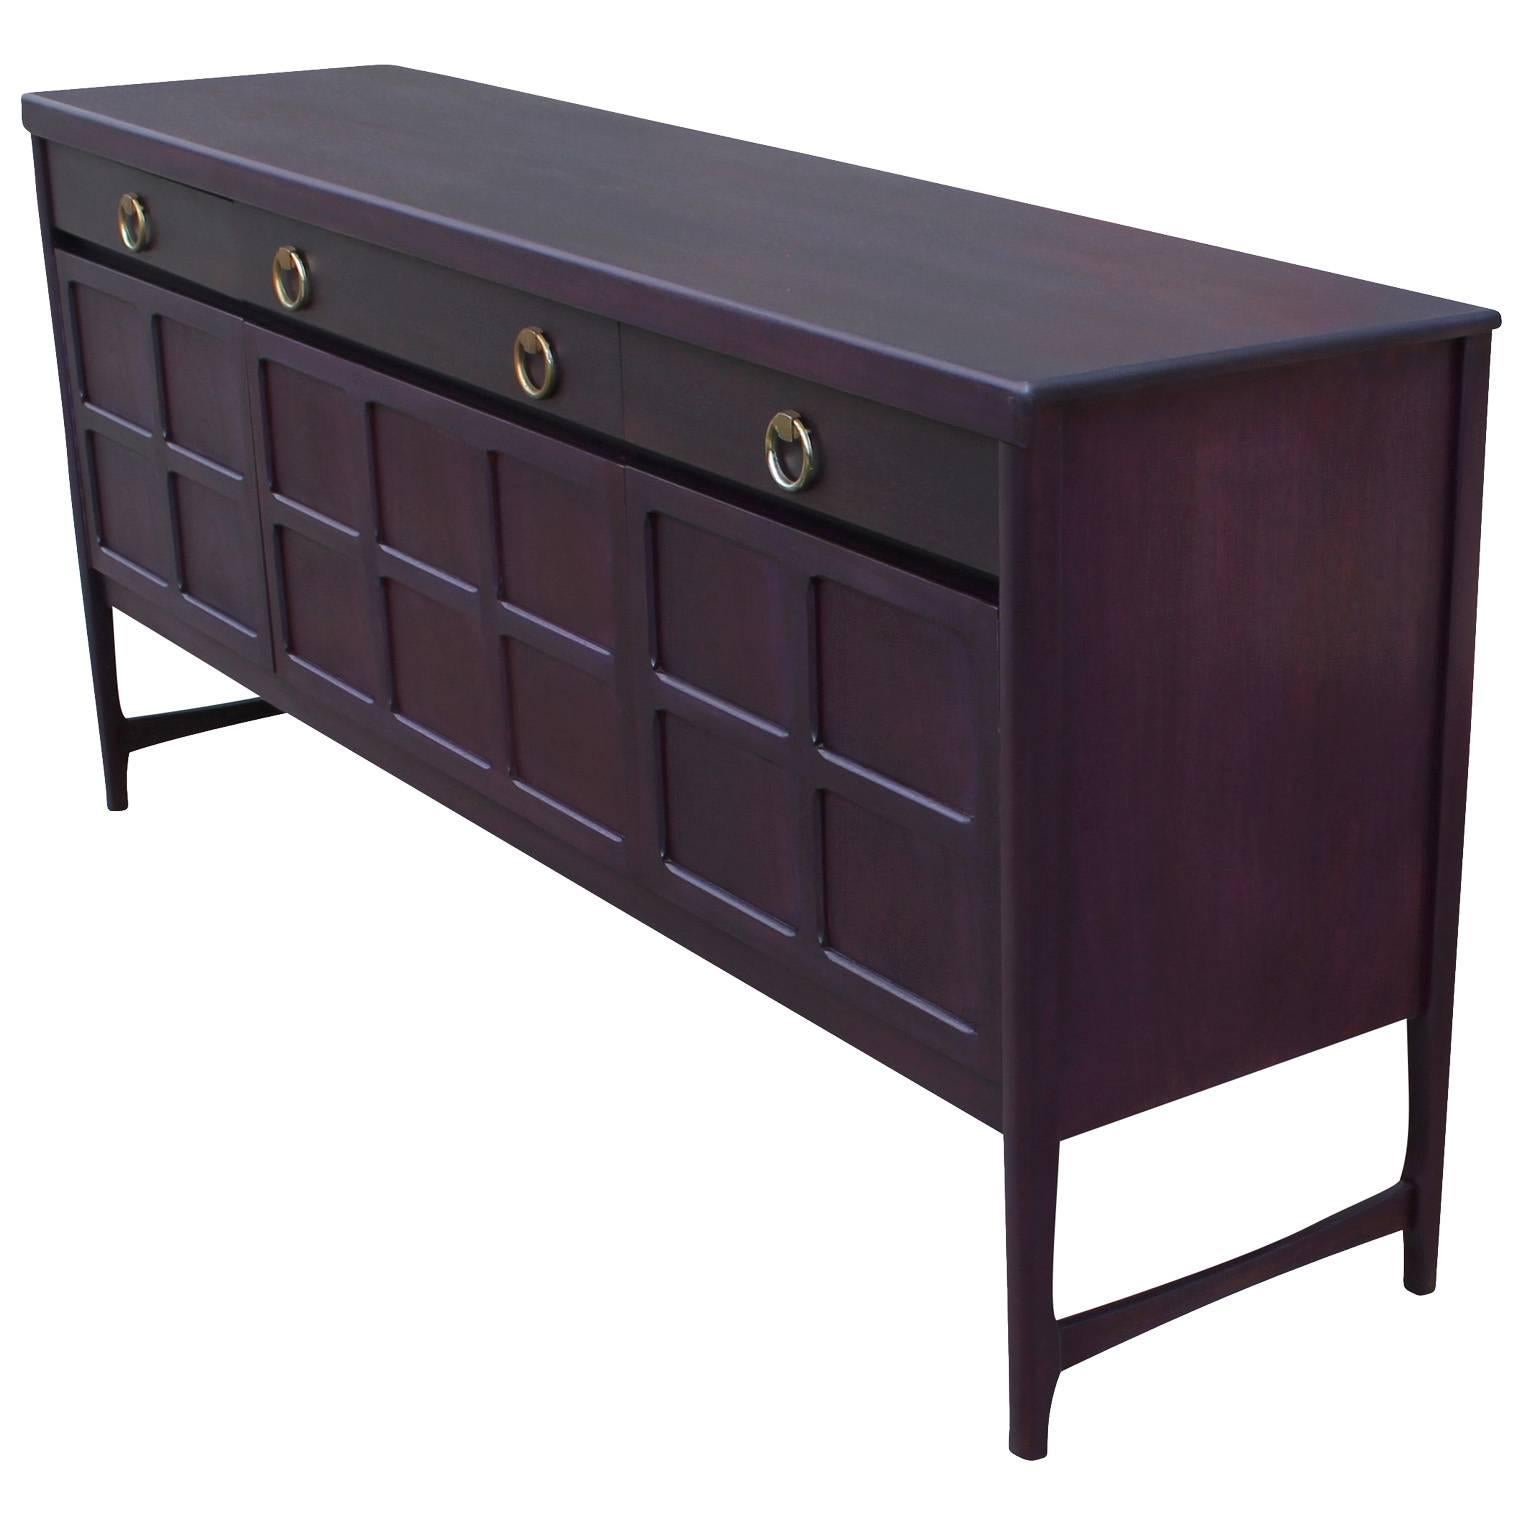 Wonderful sideboard or credenza finished in an eggplant purple aniline dye with brass ring pulls. Sideboard is constructed of mahogany and teak. Front middle cabinet door drops down to reveal a single shelf. Right and left cabinet doors open to a